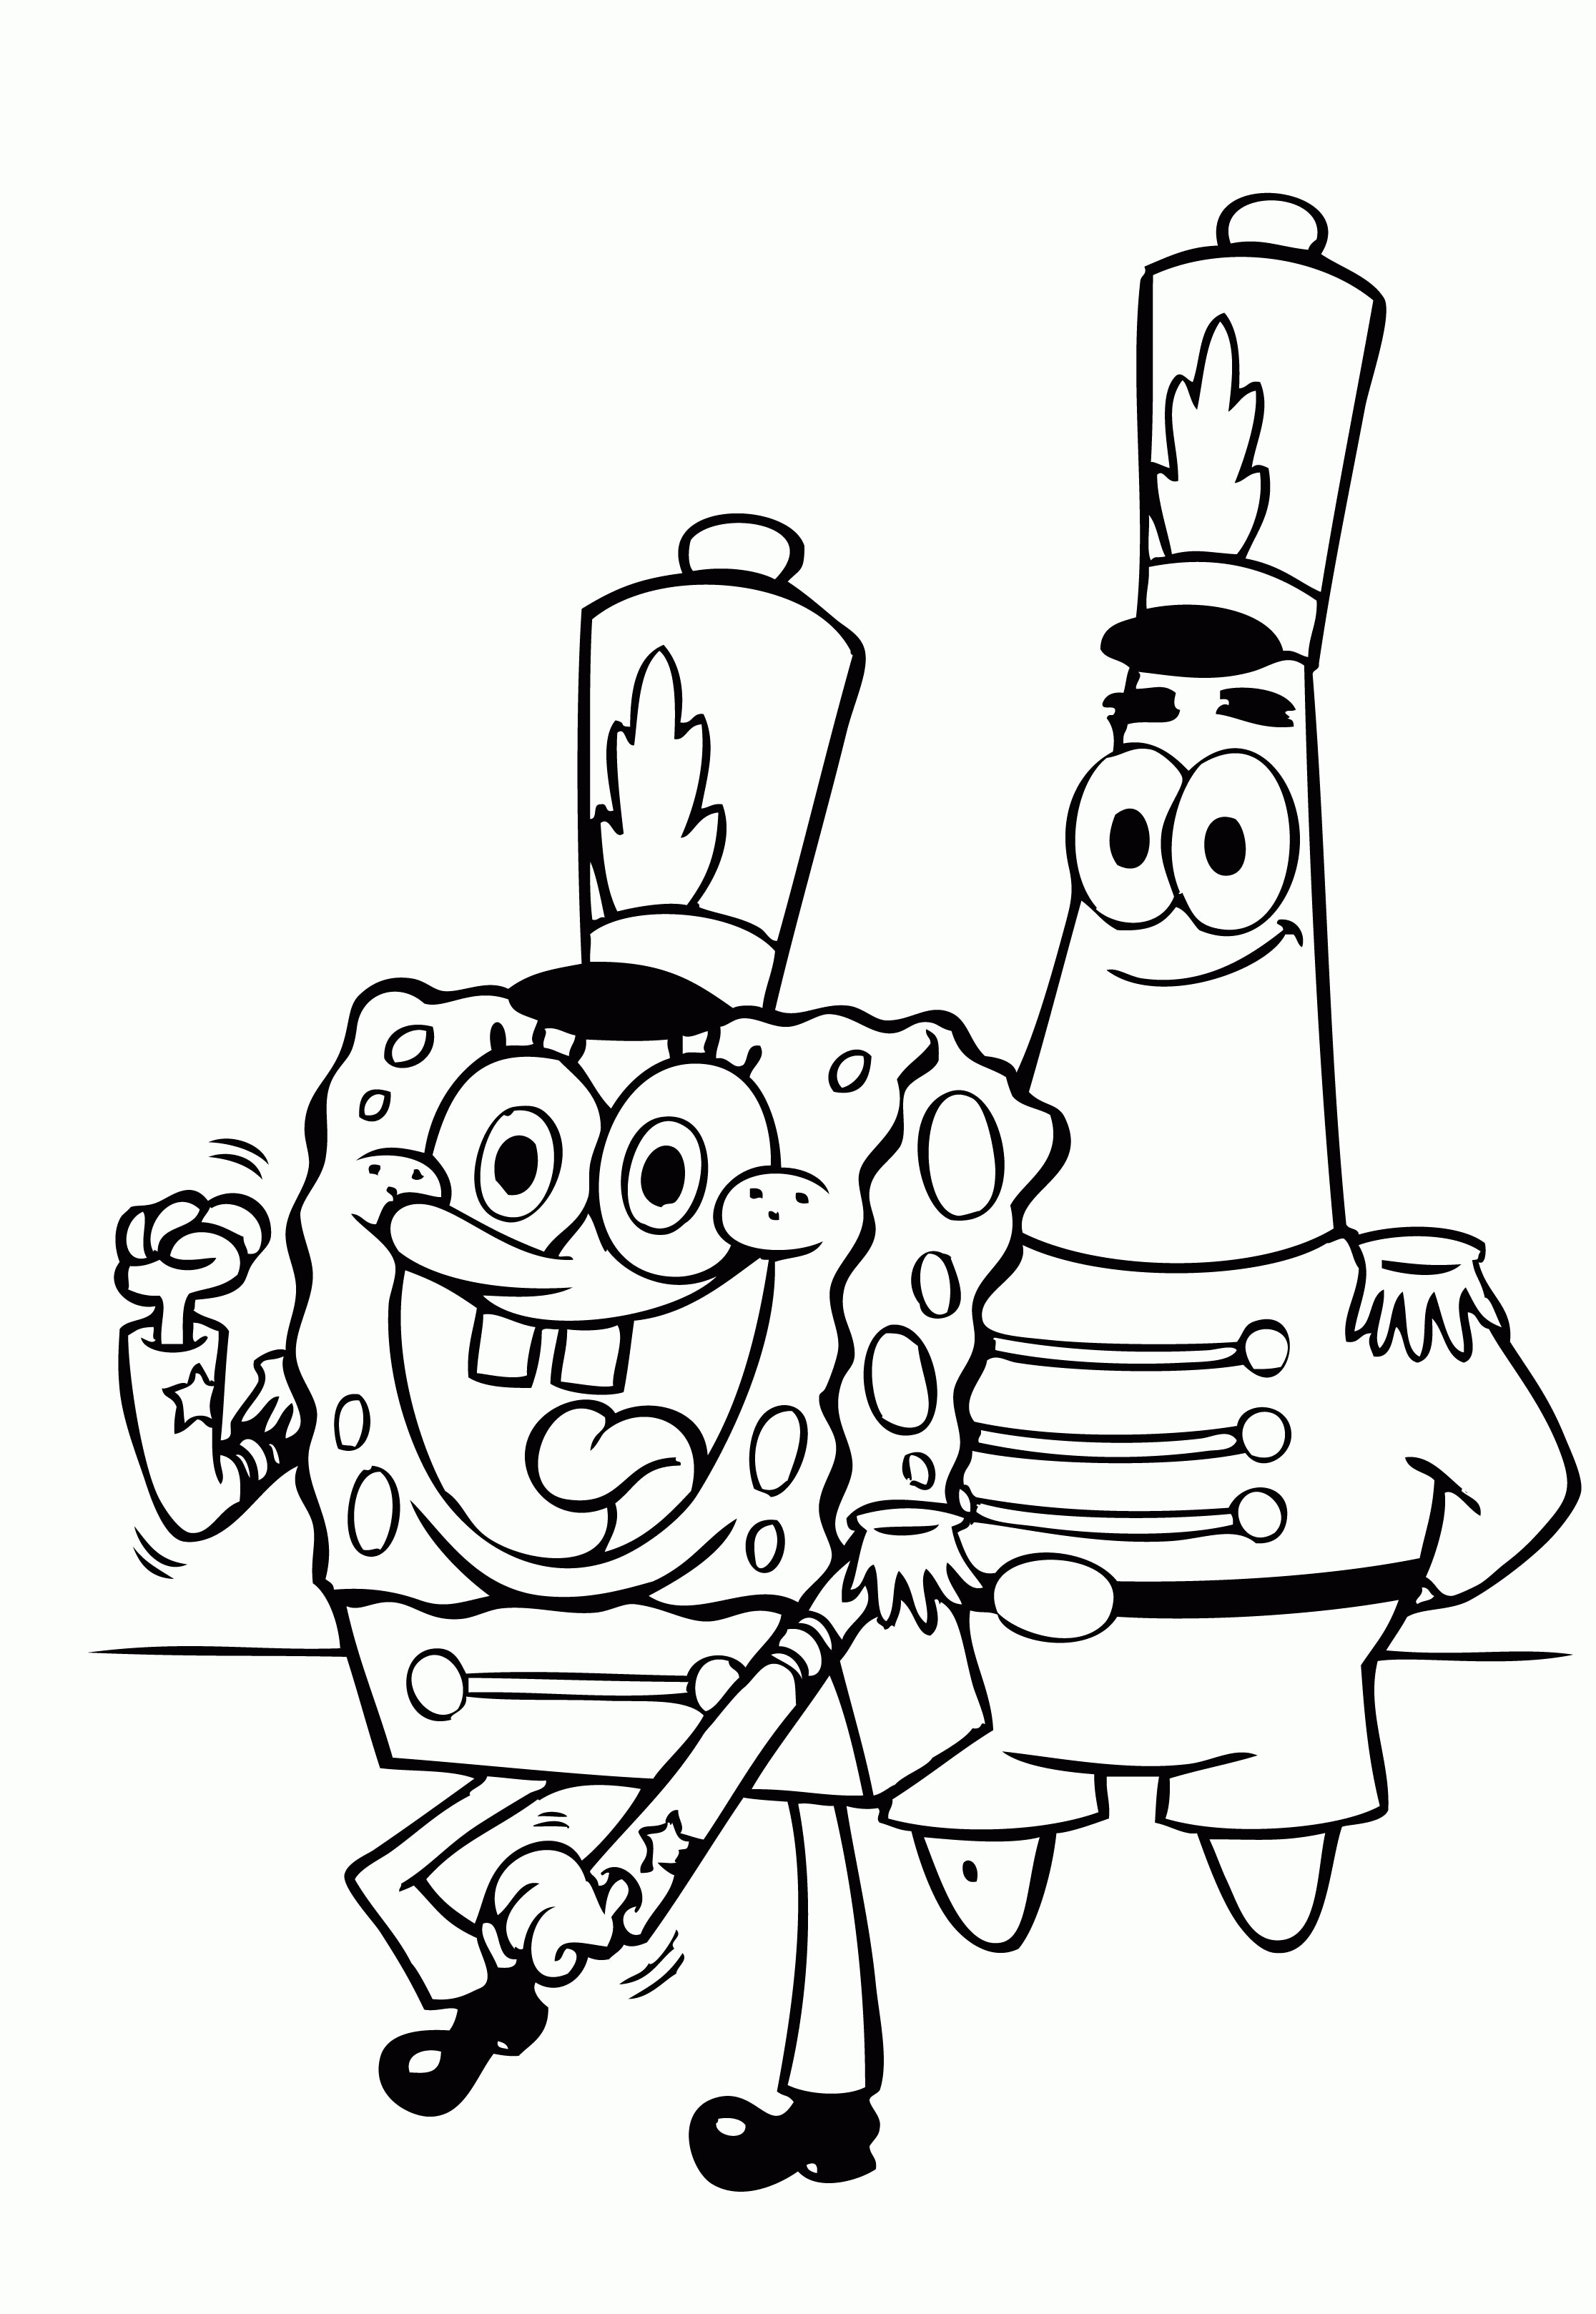 Spongebob And Patrick Coloring Pages Of Christmas | Christmas ...